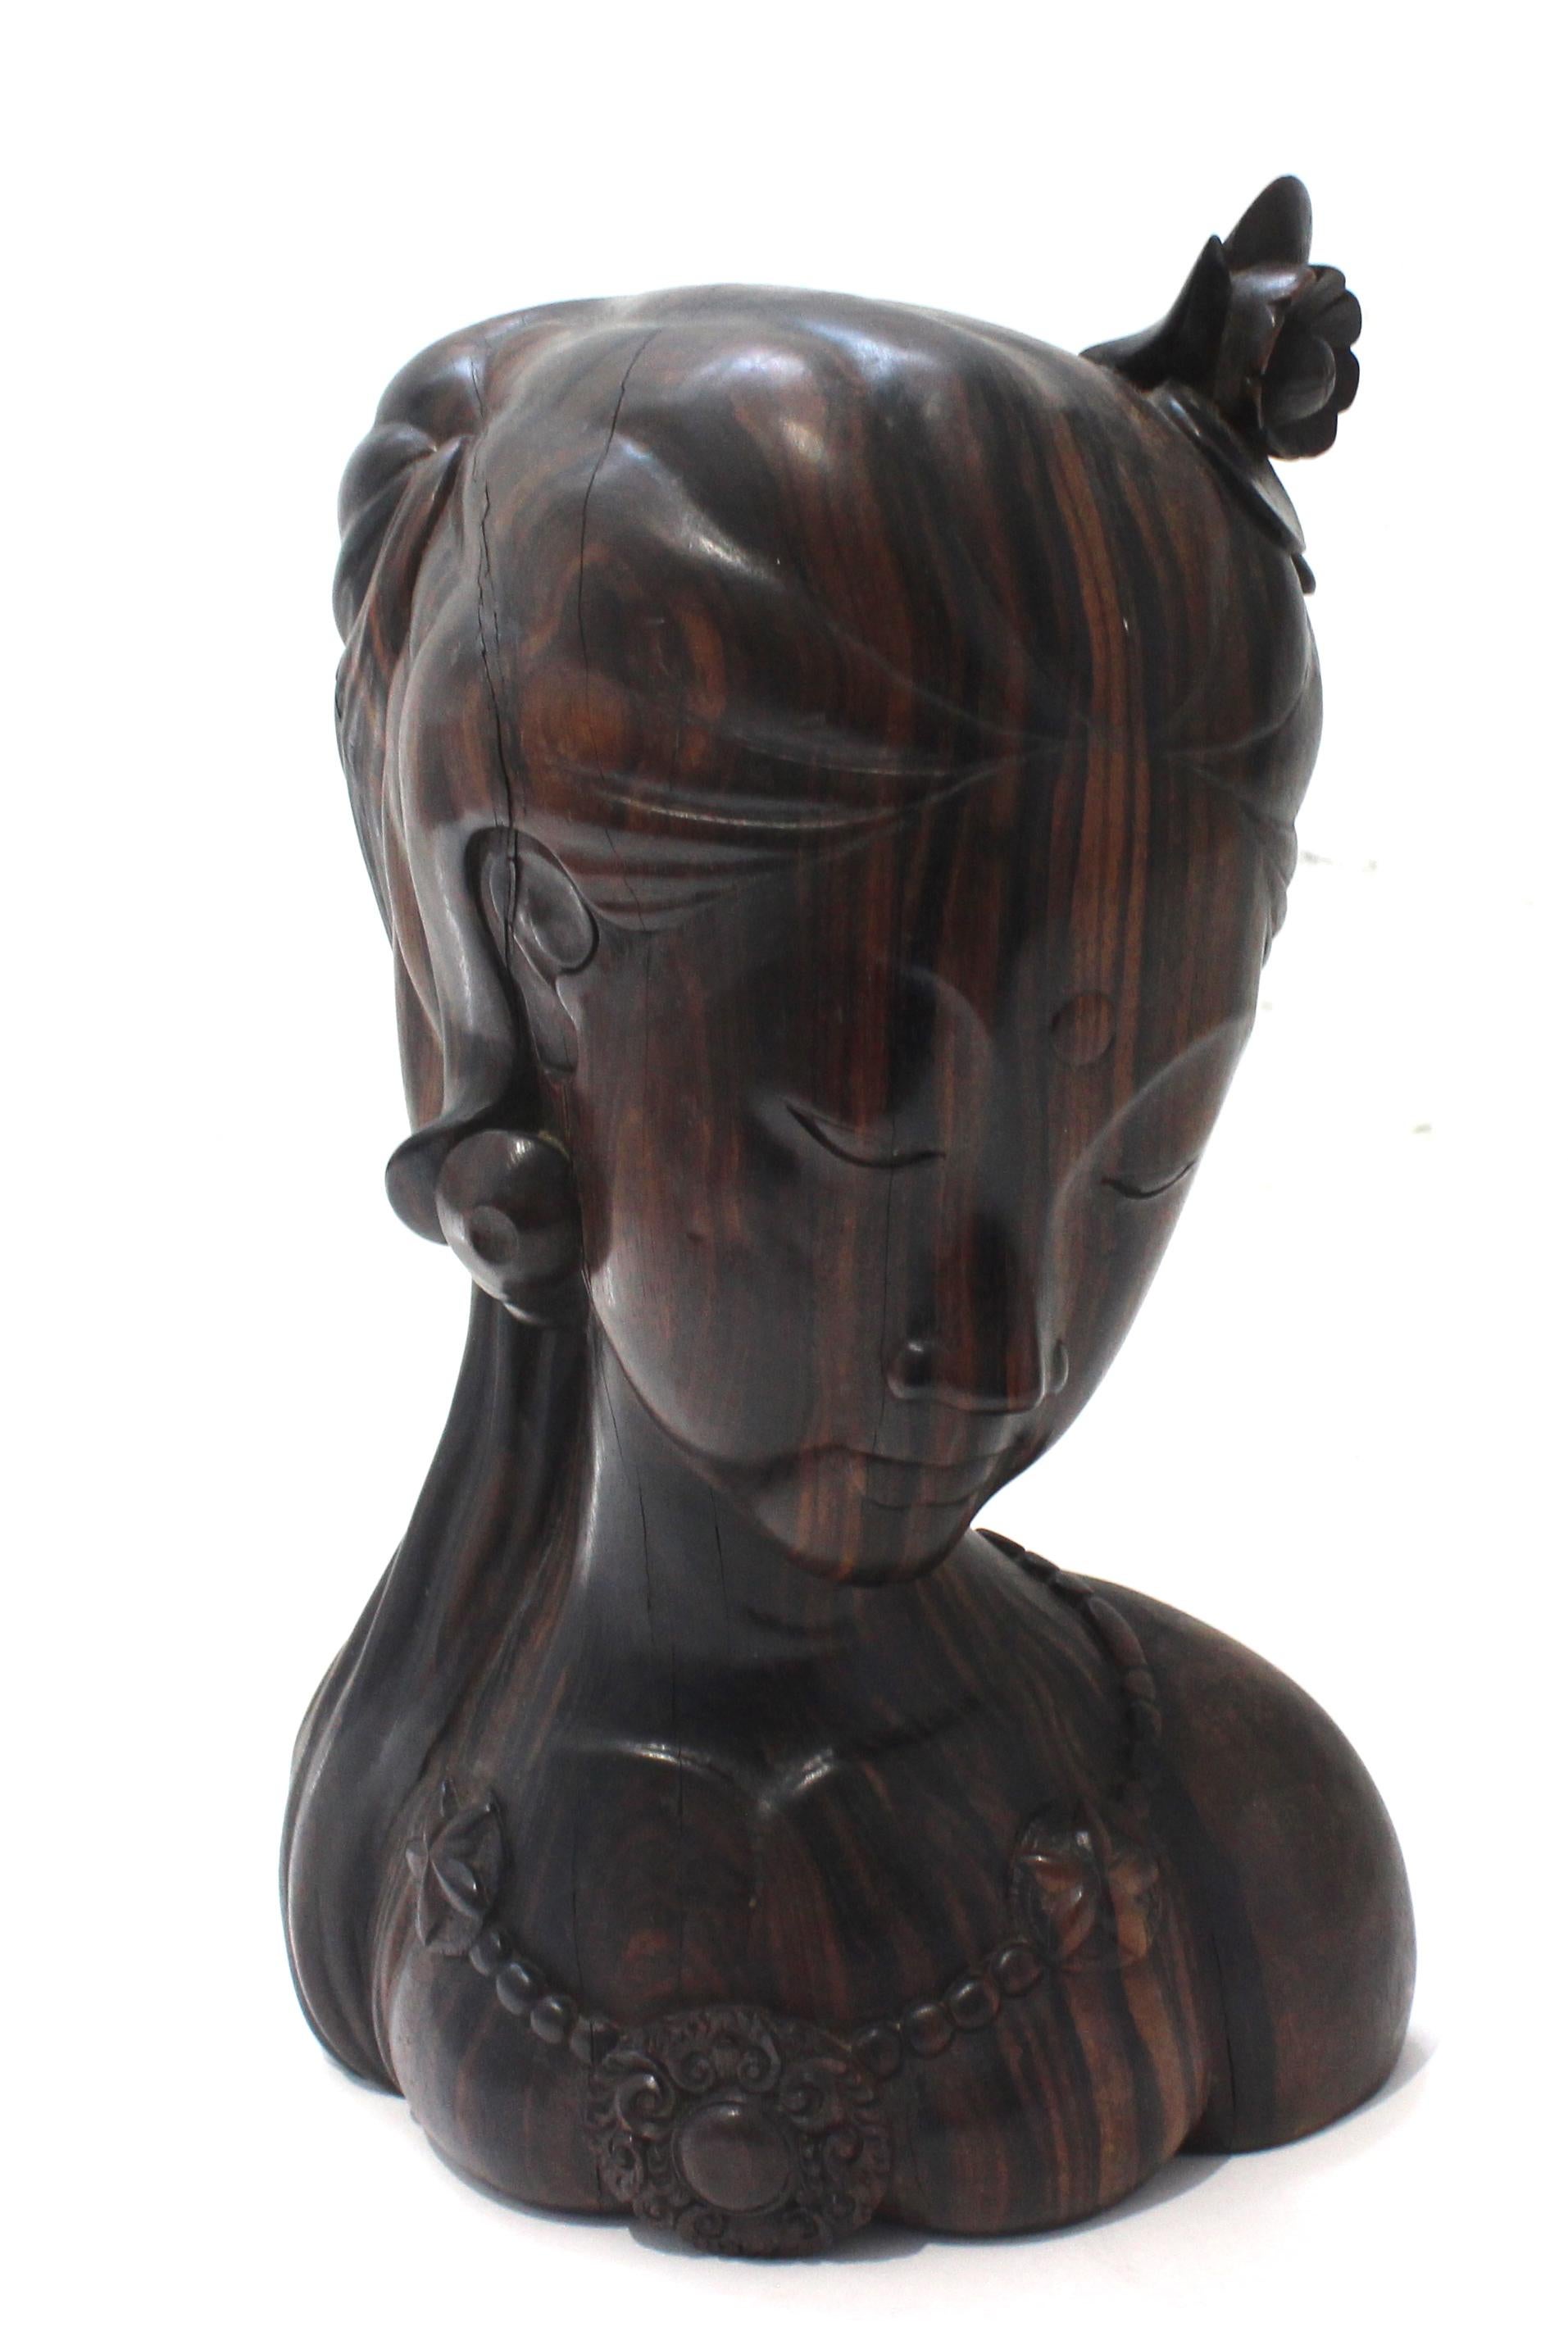 This stylish rosewood figure of a young woman was created in Bali and it will make a subtle statement with its form and use of materials. The figure is adorned with a single flower in her hair, and a necklace adorned with star motifs, and a